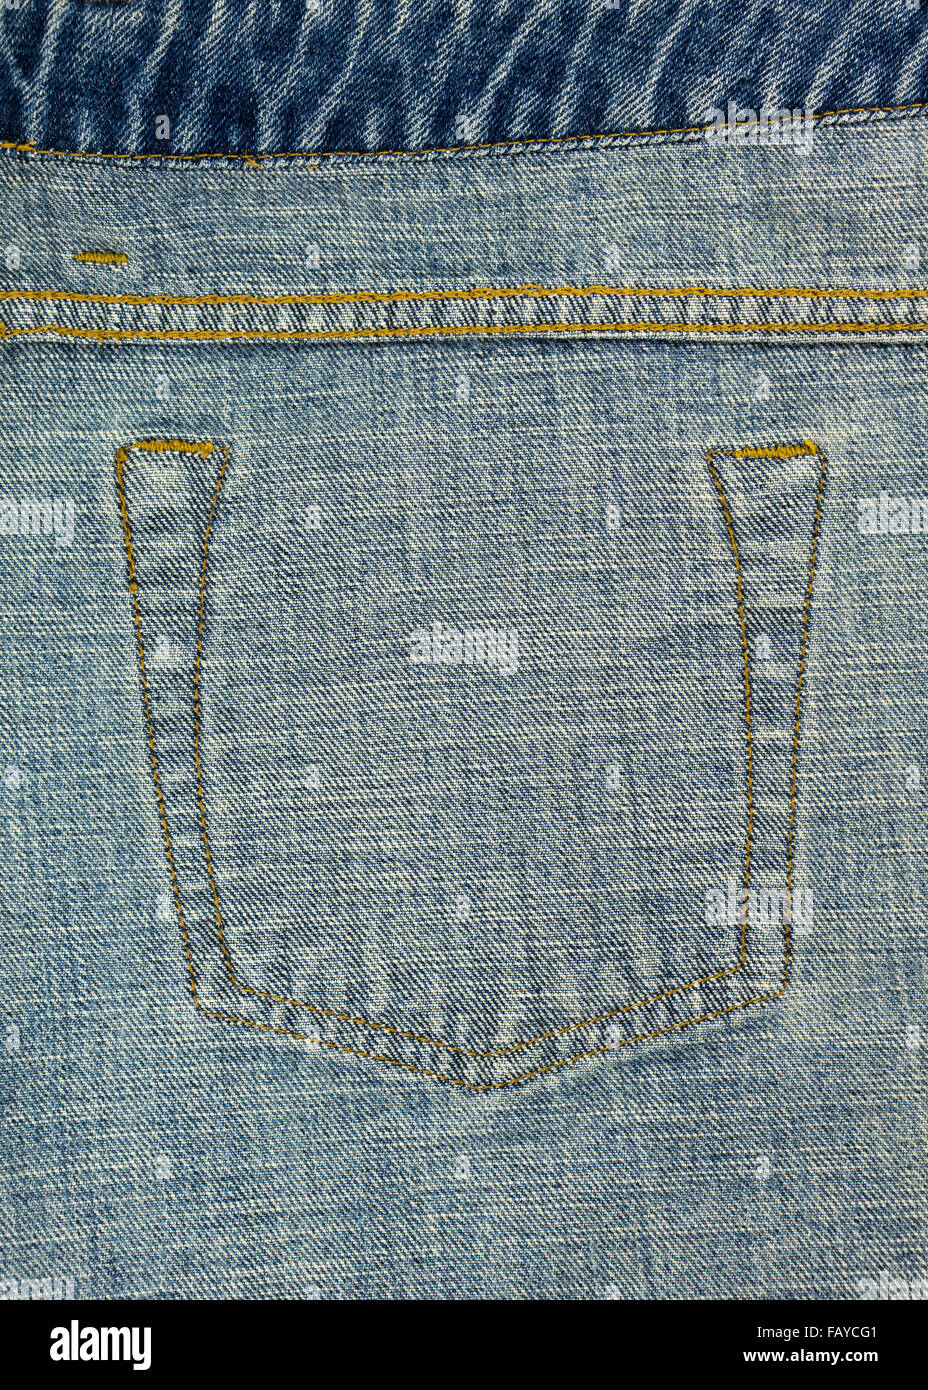 Jeans pocket seam inside texture and background Stock Photo - Alamy